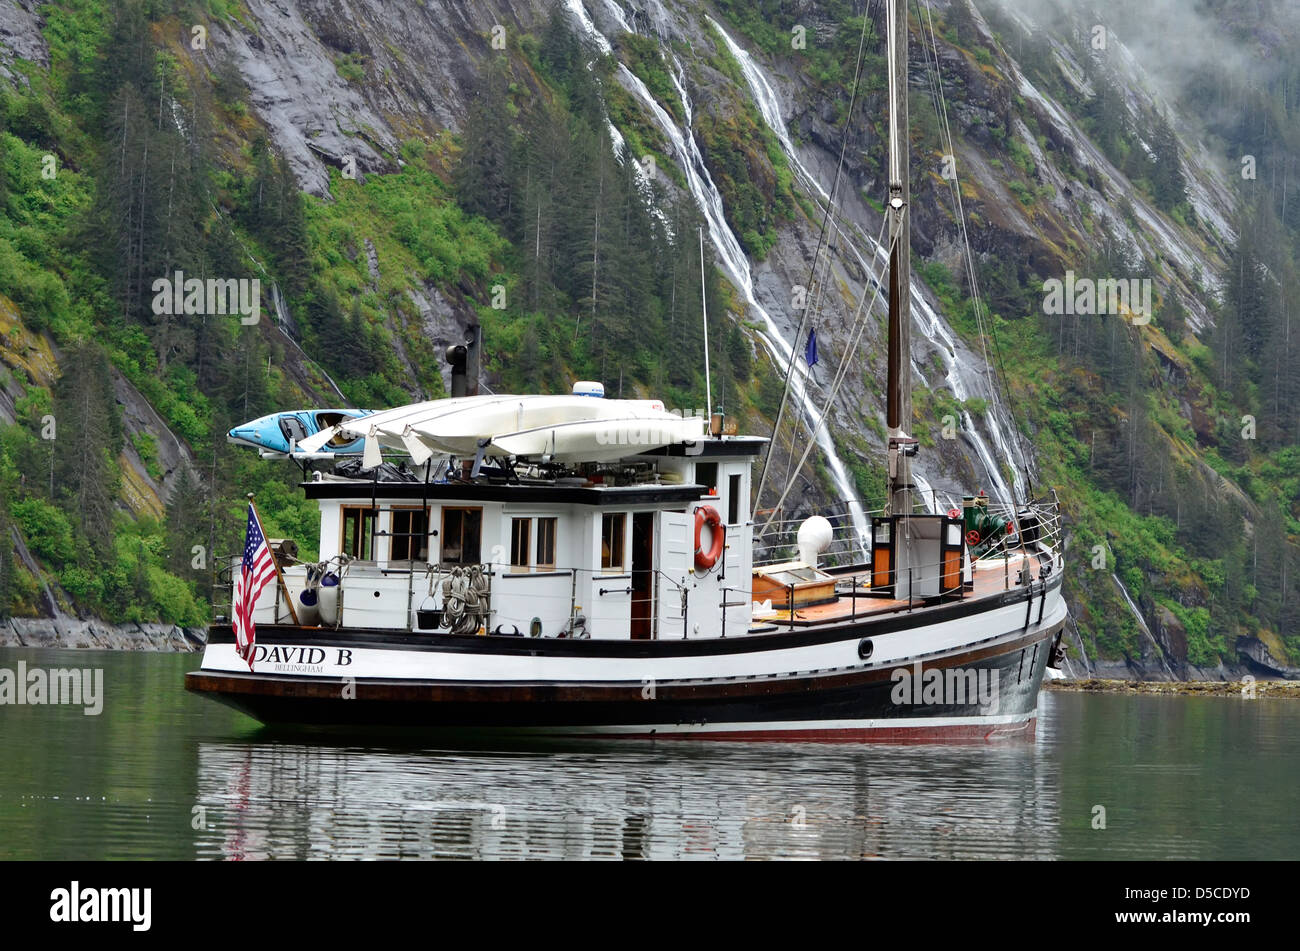 The David B, a restored boat used for cruising tours, in Fords Terror, Alaska. Stock Photo